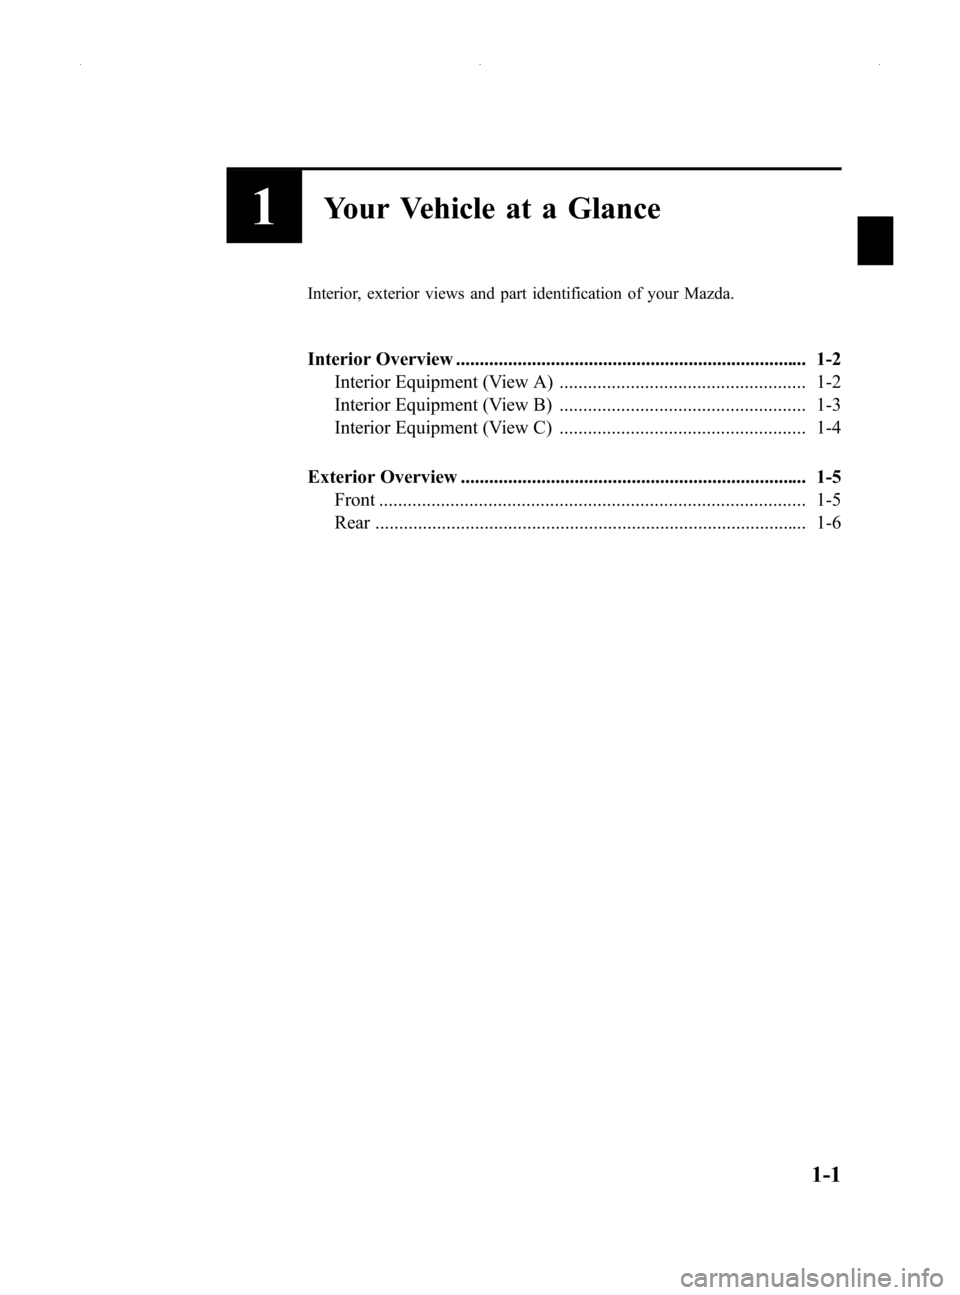 MAZDA MODEL MX-5 2014  Owners Manual (in English) Black plate (7,1)
1Your Vehicle at a Glance
Interior, exterior views and part identification of your Mazda.
Interior Overview ..........................................................................